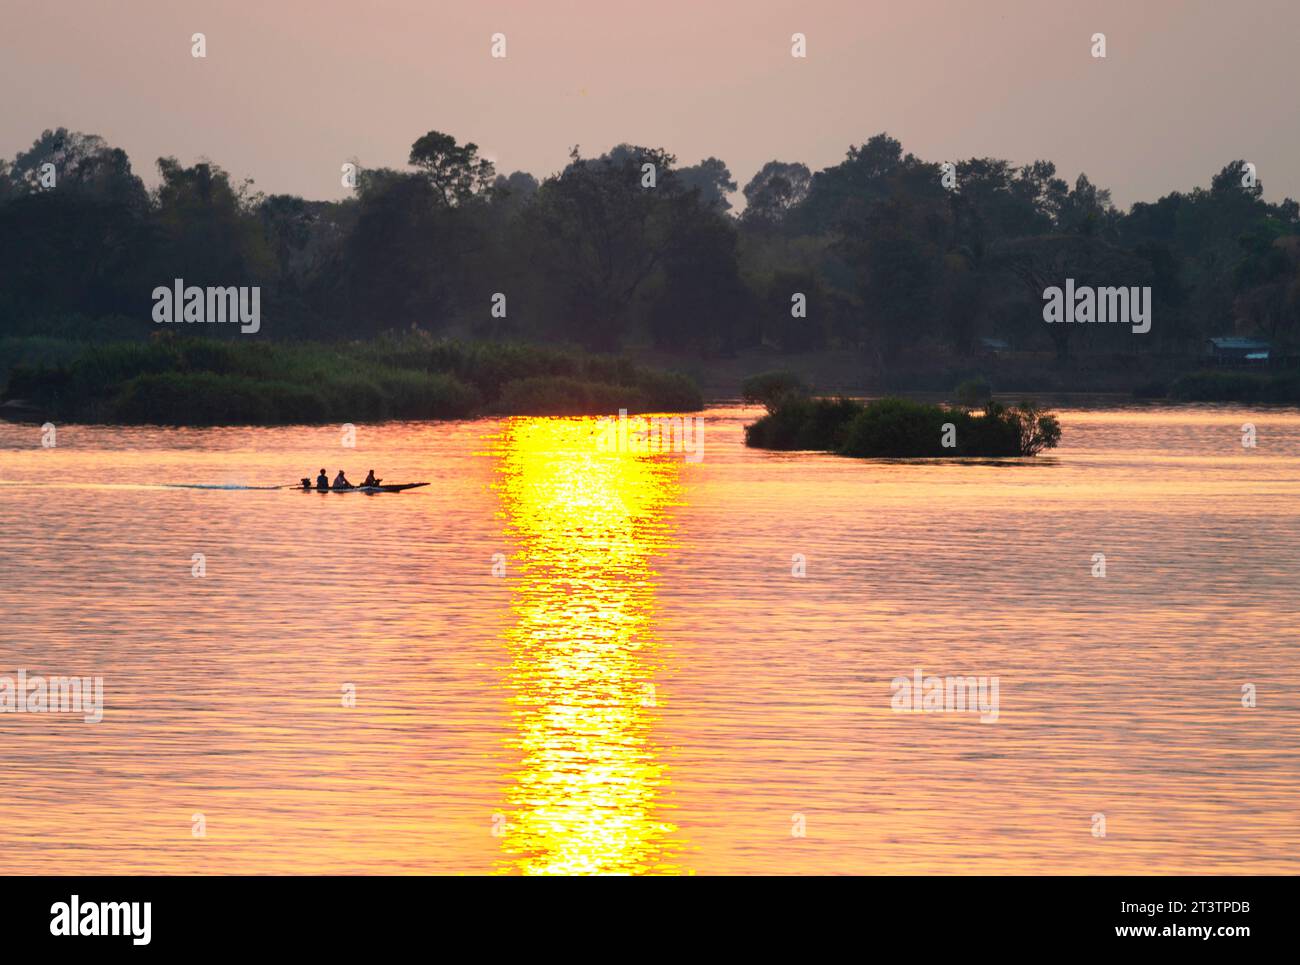 Silhouettes of human figures in a small canoe,drifting across the calm,peaceful waters of the Mekong,through rays of golden light reflected on the wat Stock Photo